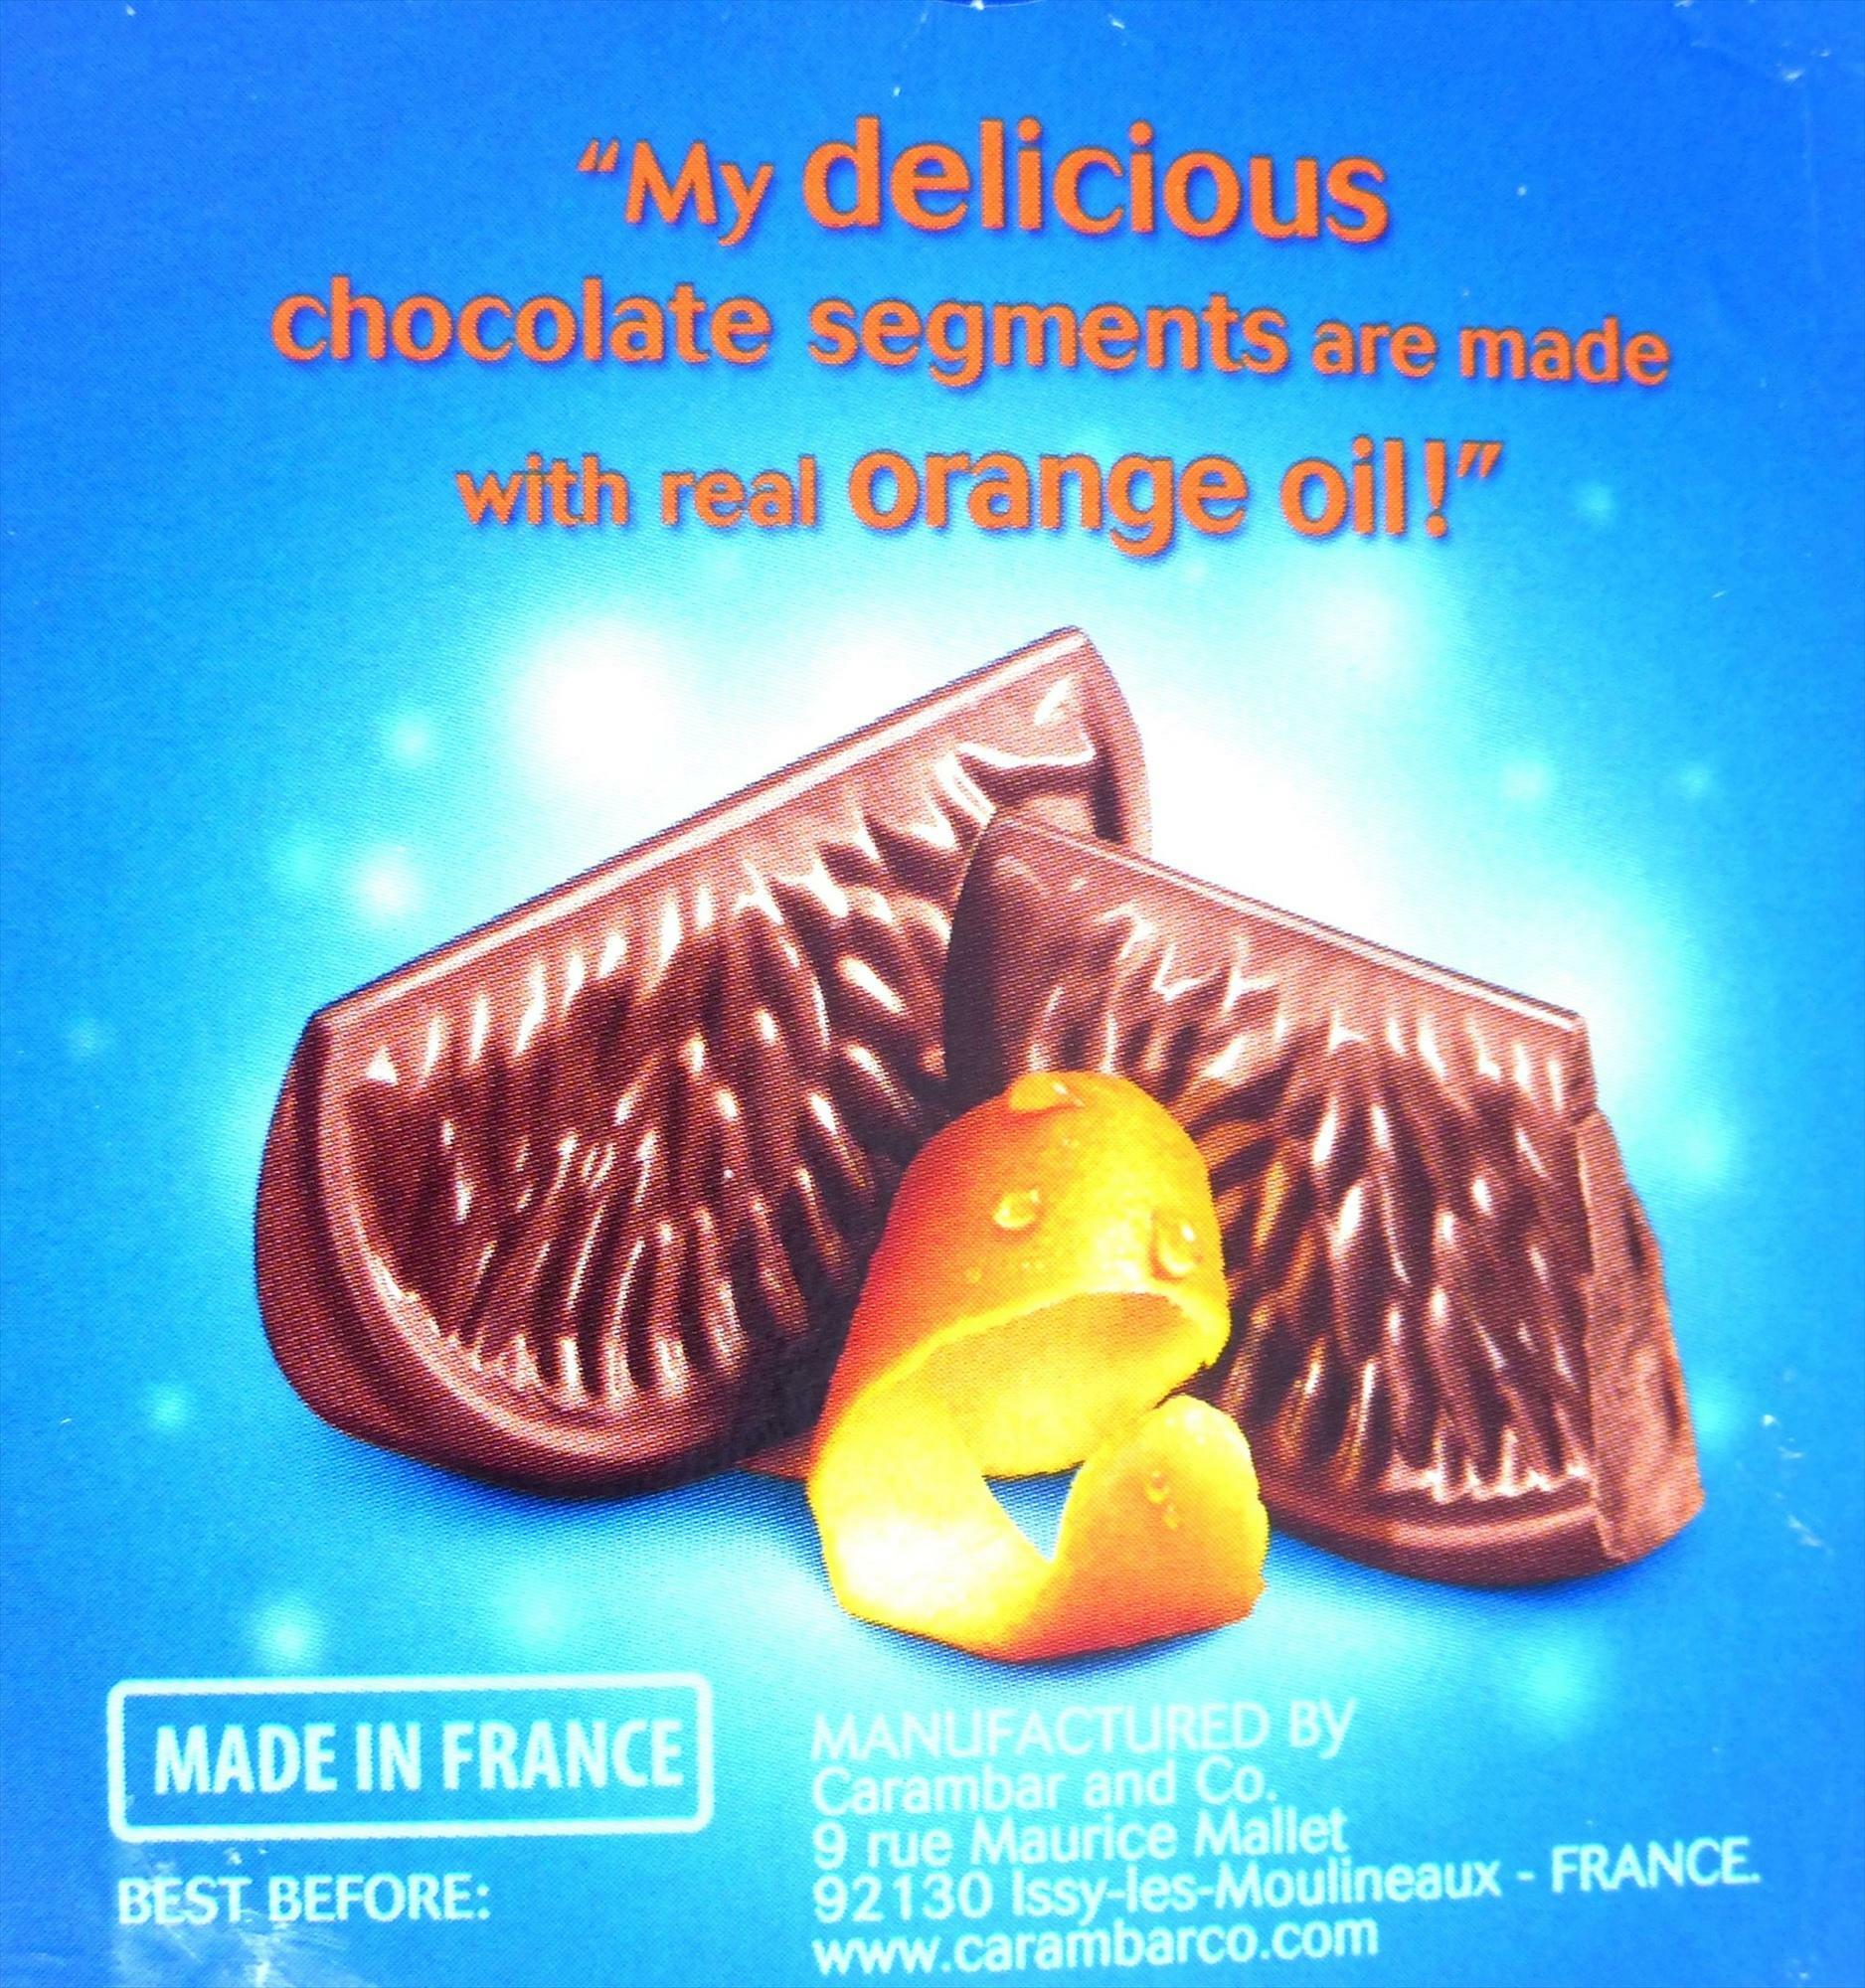 My delicious chocolate segments are made with real ORANGE oil